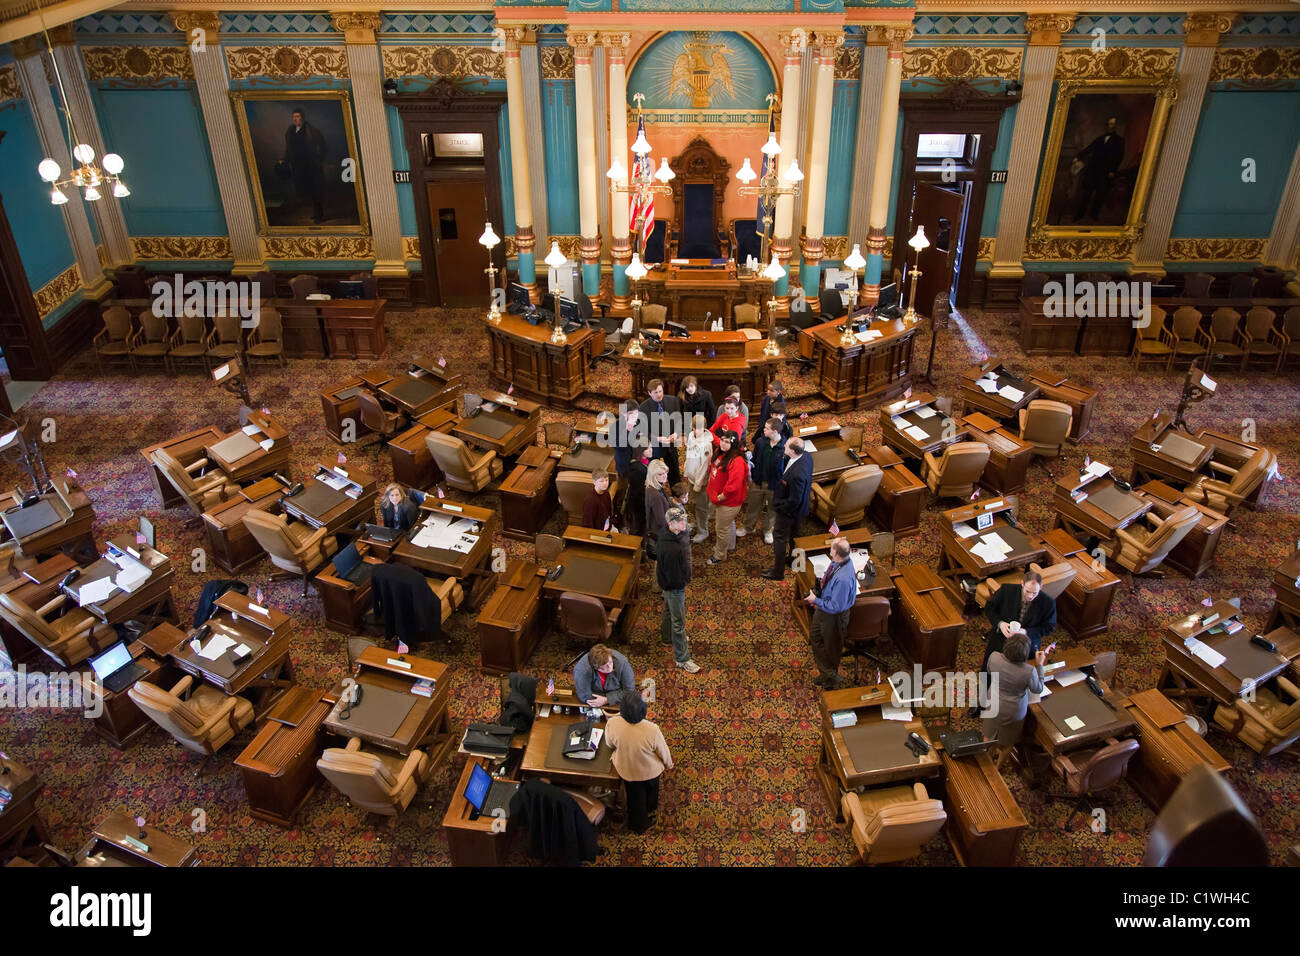 Lansing, Michigan - A group of students tours the state Senate chamber in the Michigan state capitol building. Stock Photo